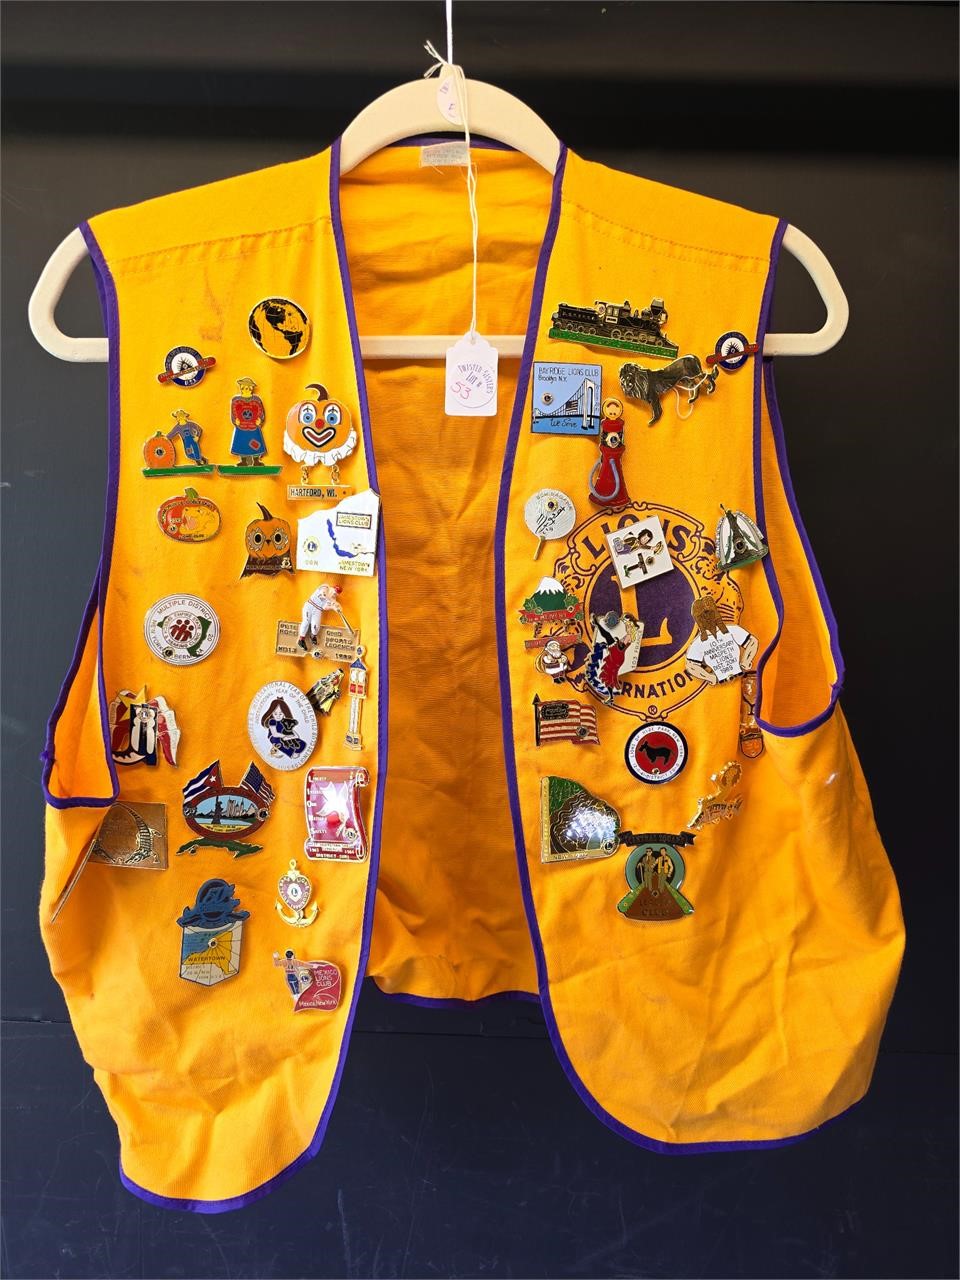 Vintage Lions Club vest with many asst pins